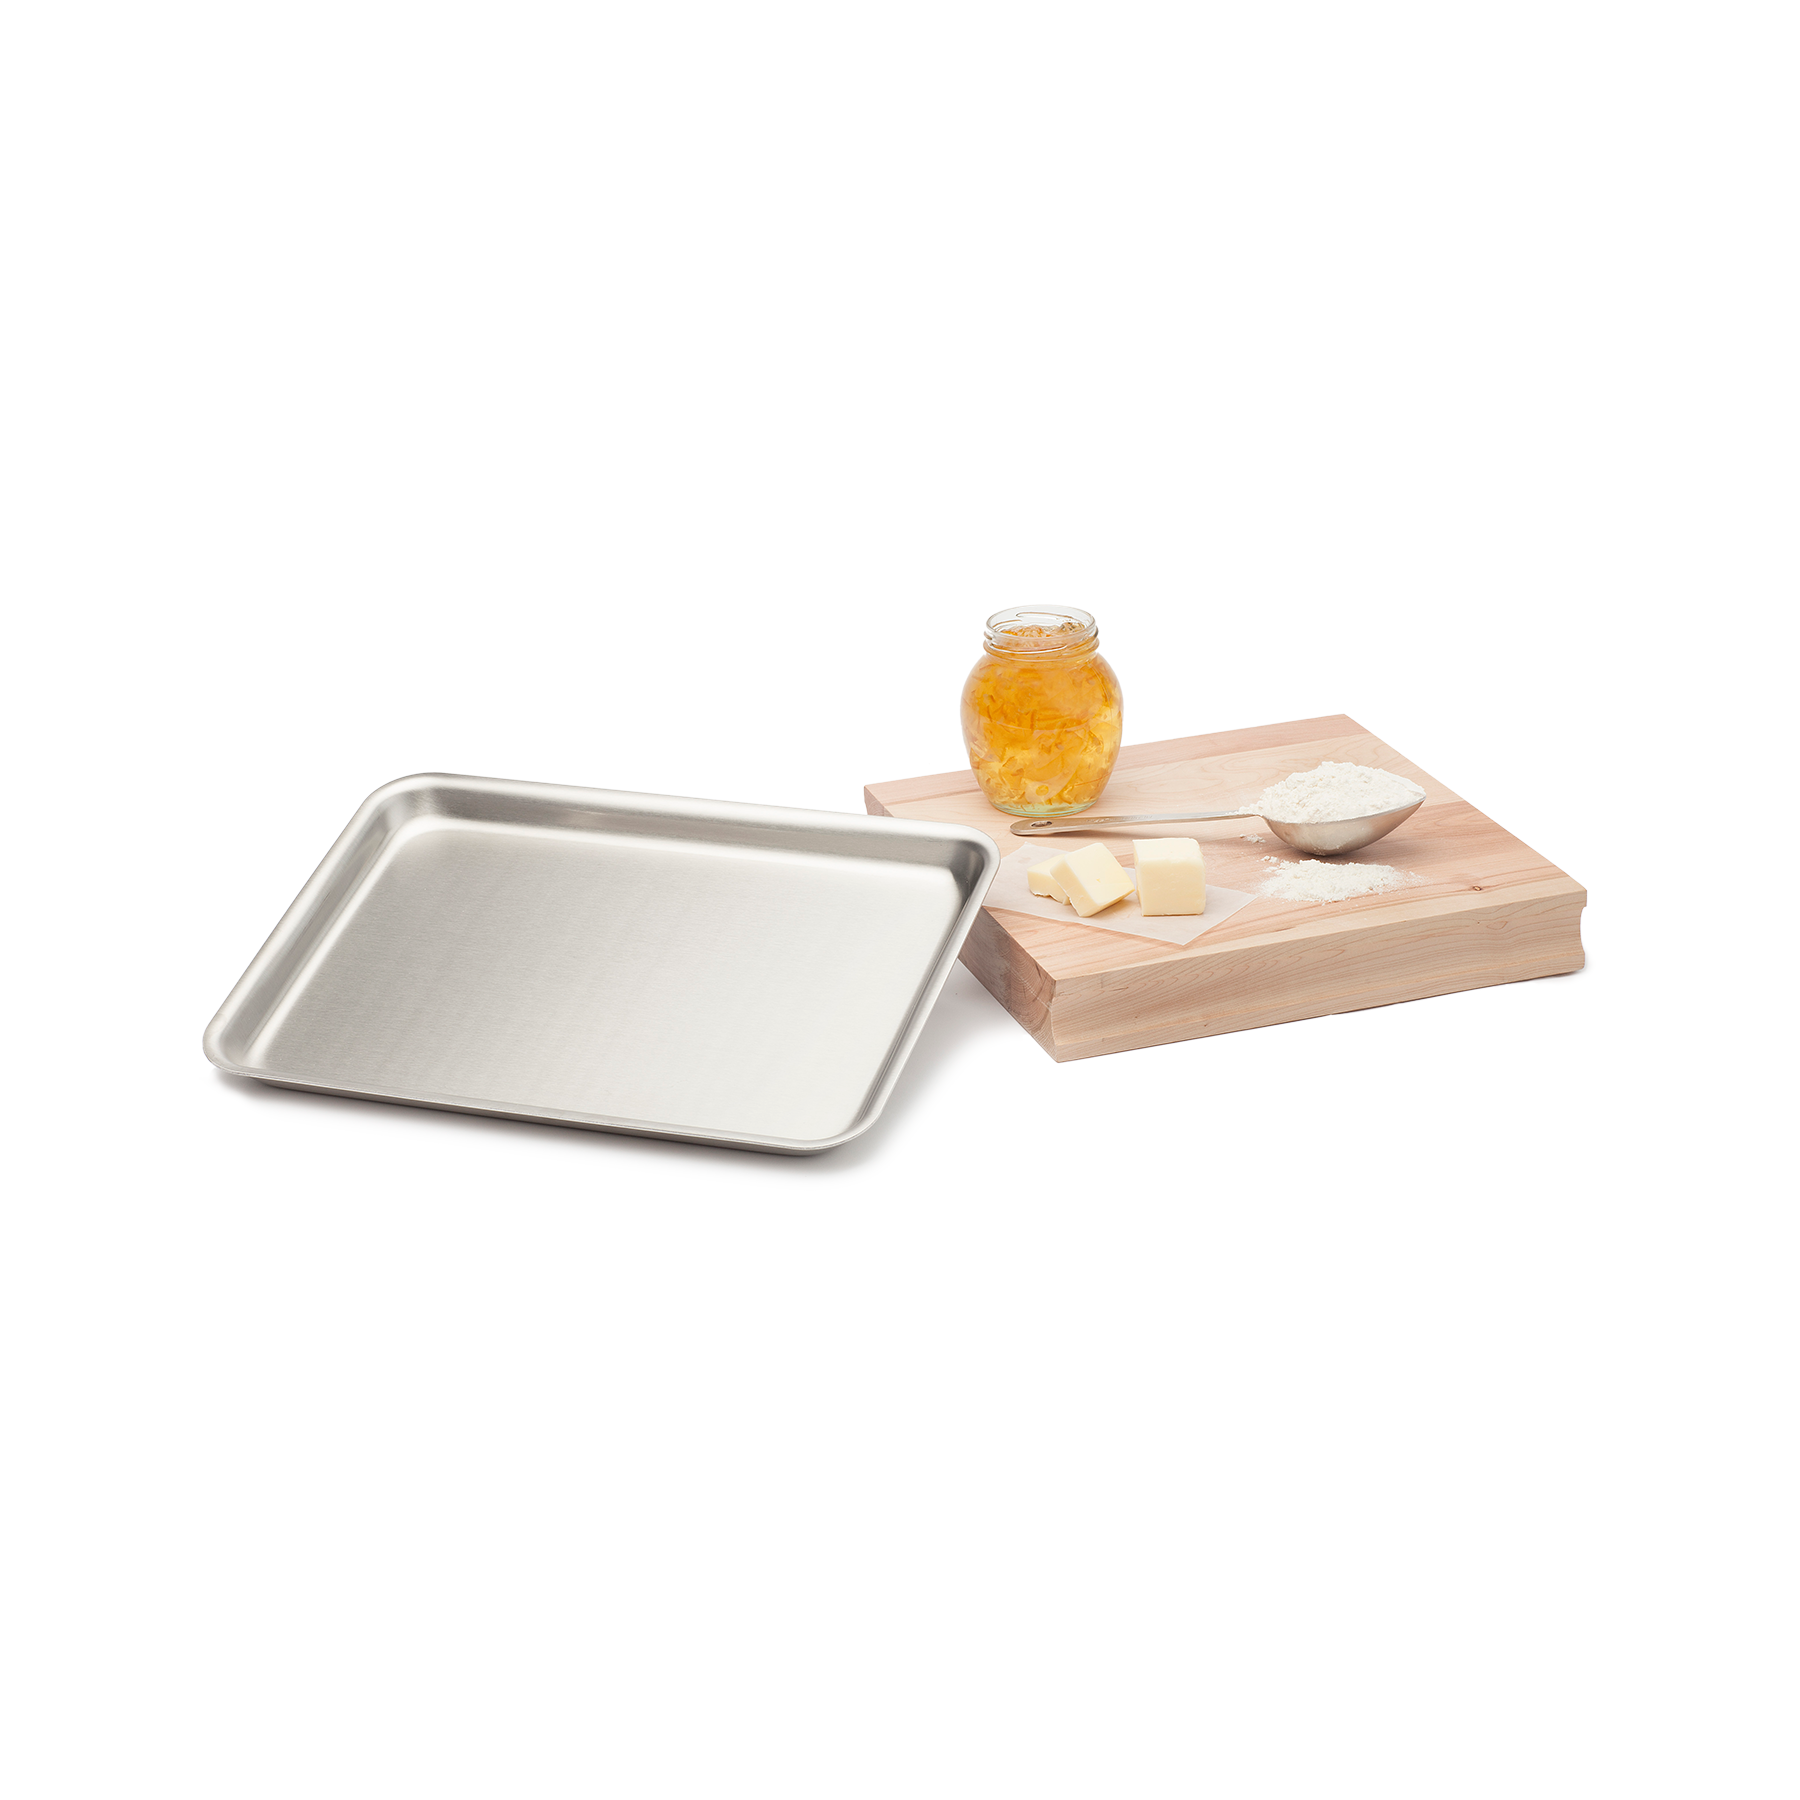 D3 Stainless Ovenware Jelly Roll Pan with Turner